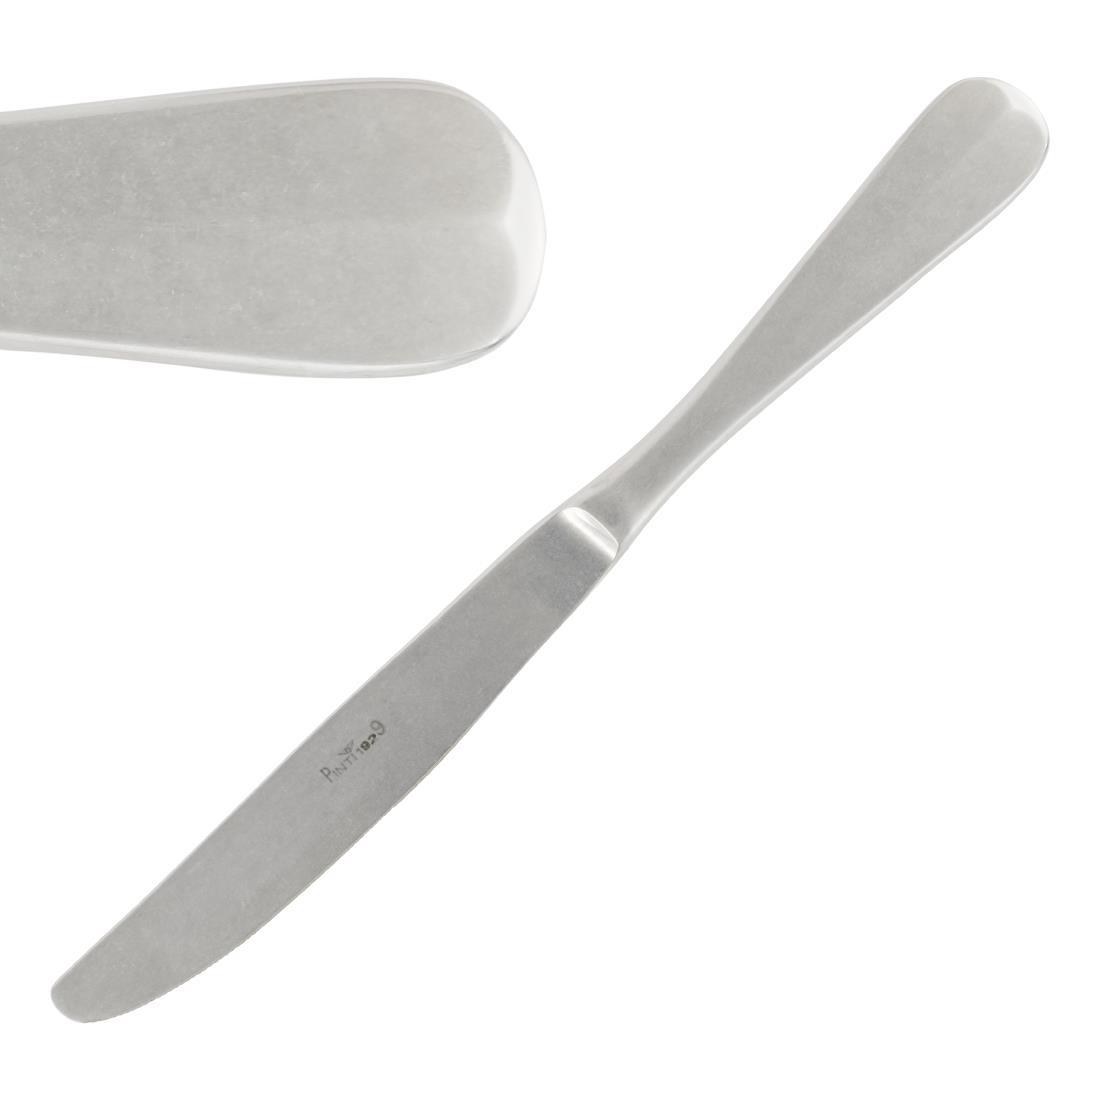 Pintinox Baguette Stonewashed Dessert Knife (Pack of 12) - GN785  - 1